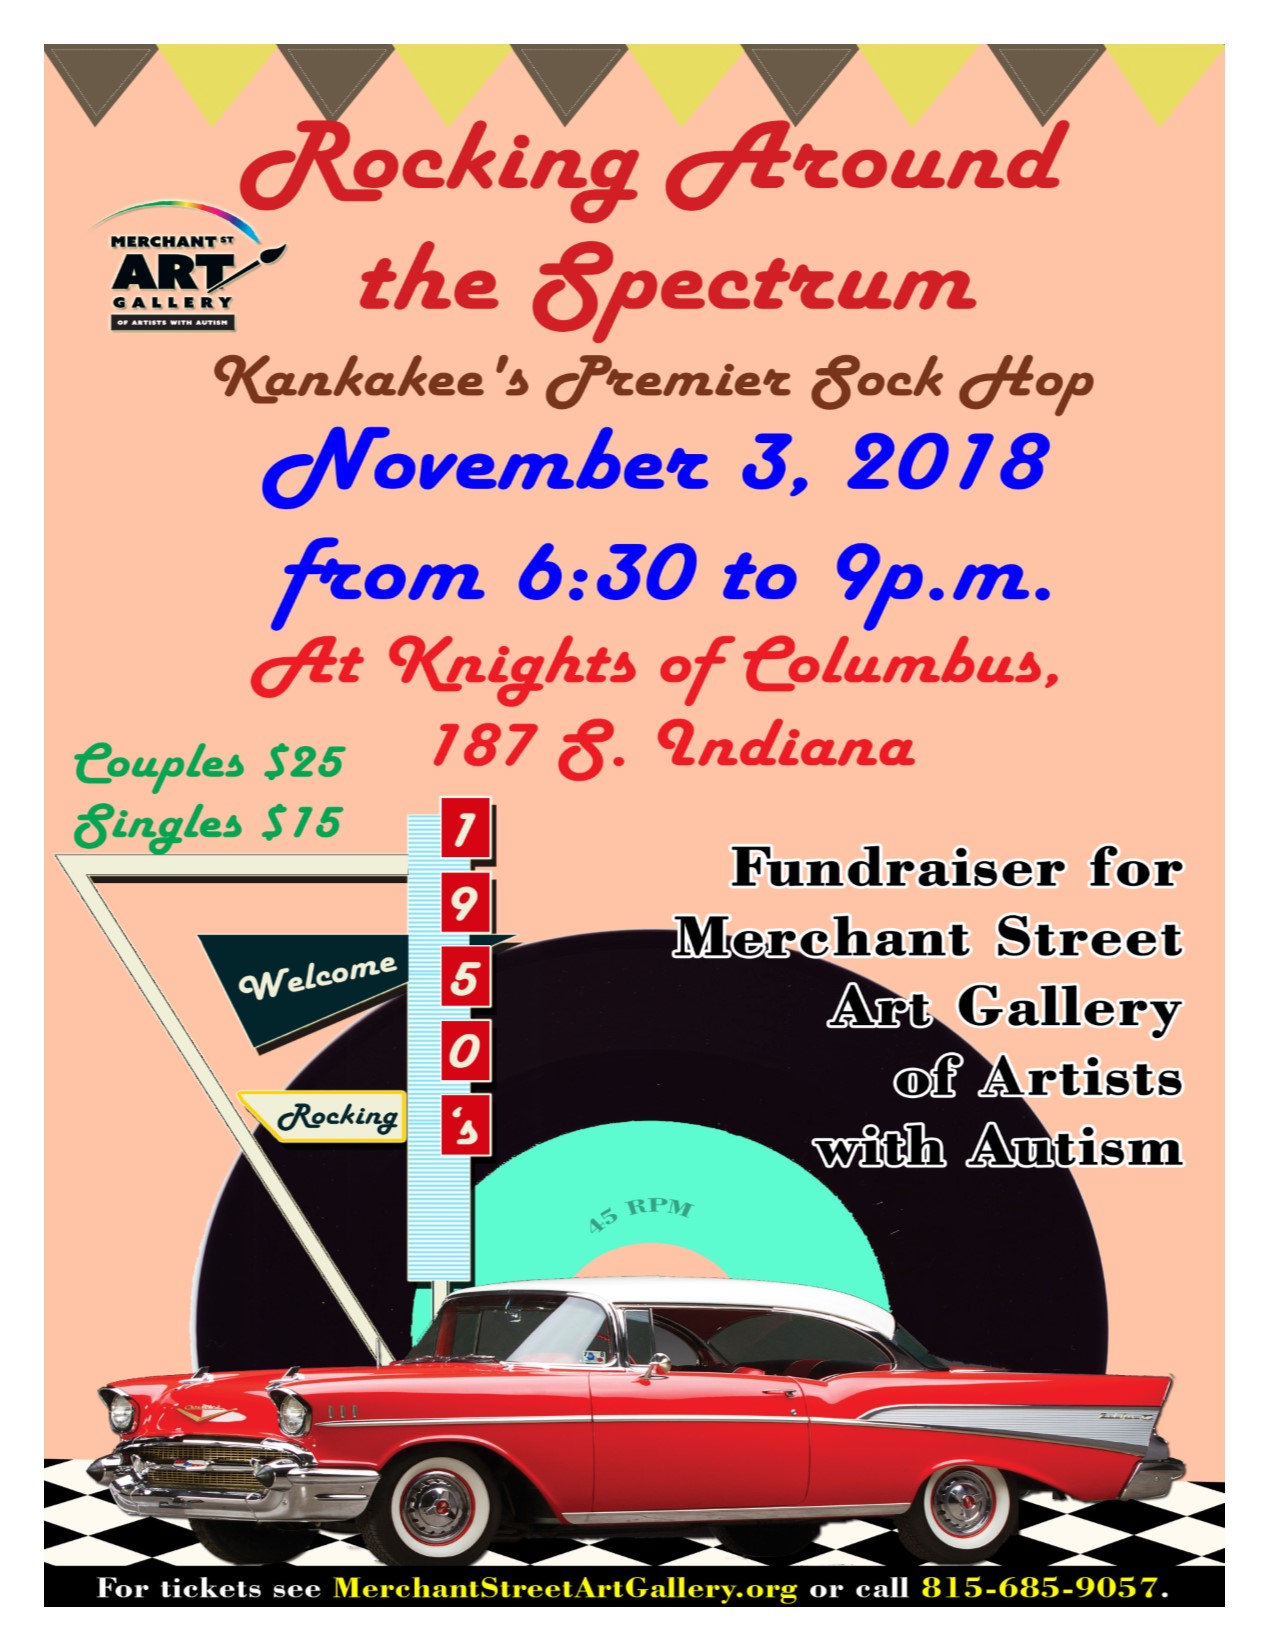 Rocking Around the Spectrum Kankakee’s Premier Sock Hop! Fundraiser for Merchant Street Art Gallery of Artists with Autism. You will have an opportunity to bid on many wonderful donations: baskets, Blue Man Group Tickets, White Sox Tickets, signed picture